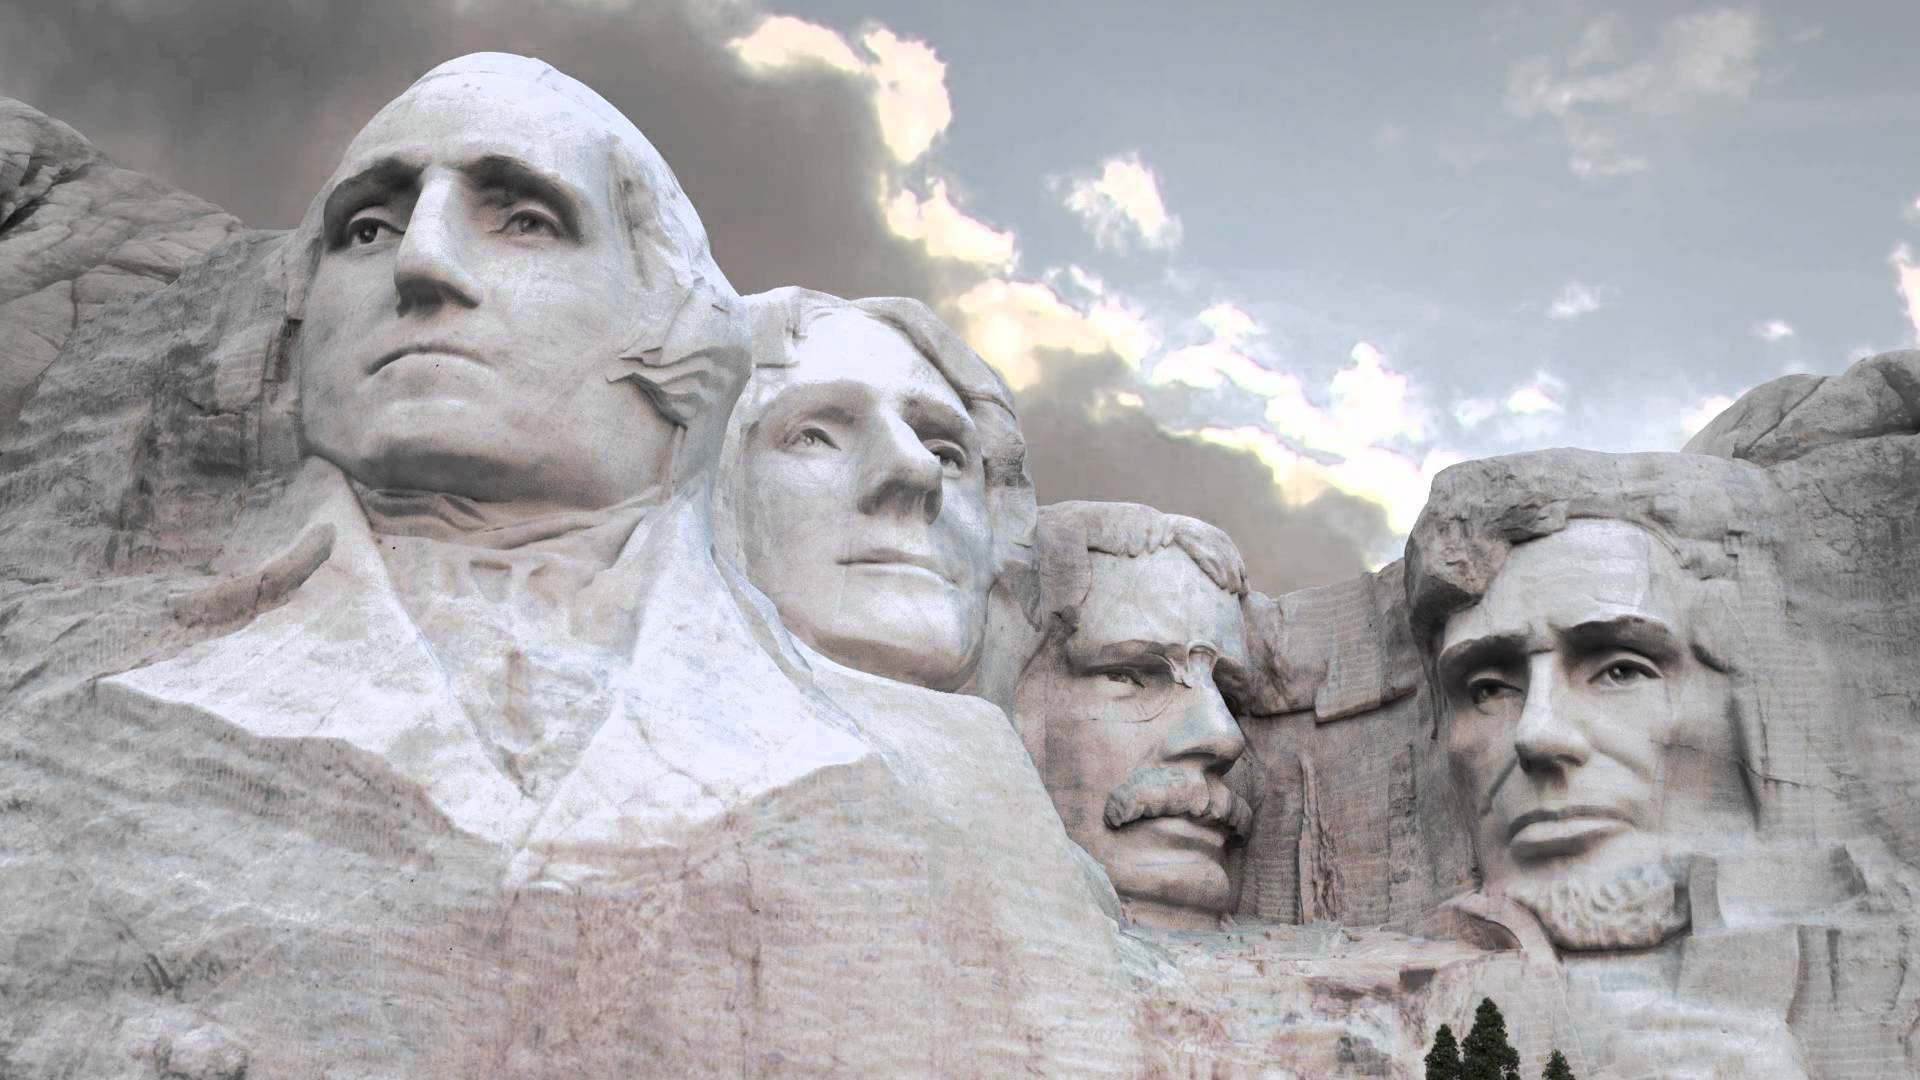 Mount Rushmore On A Gloomy Day Wallpaper